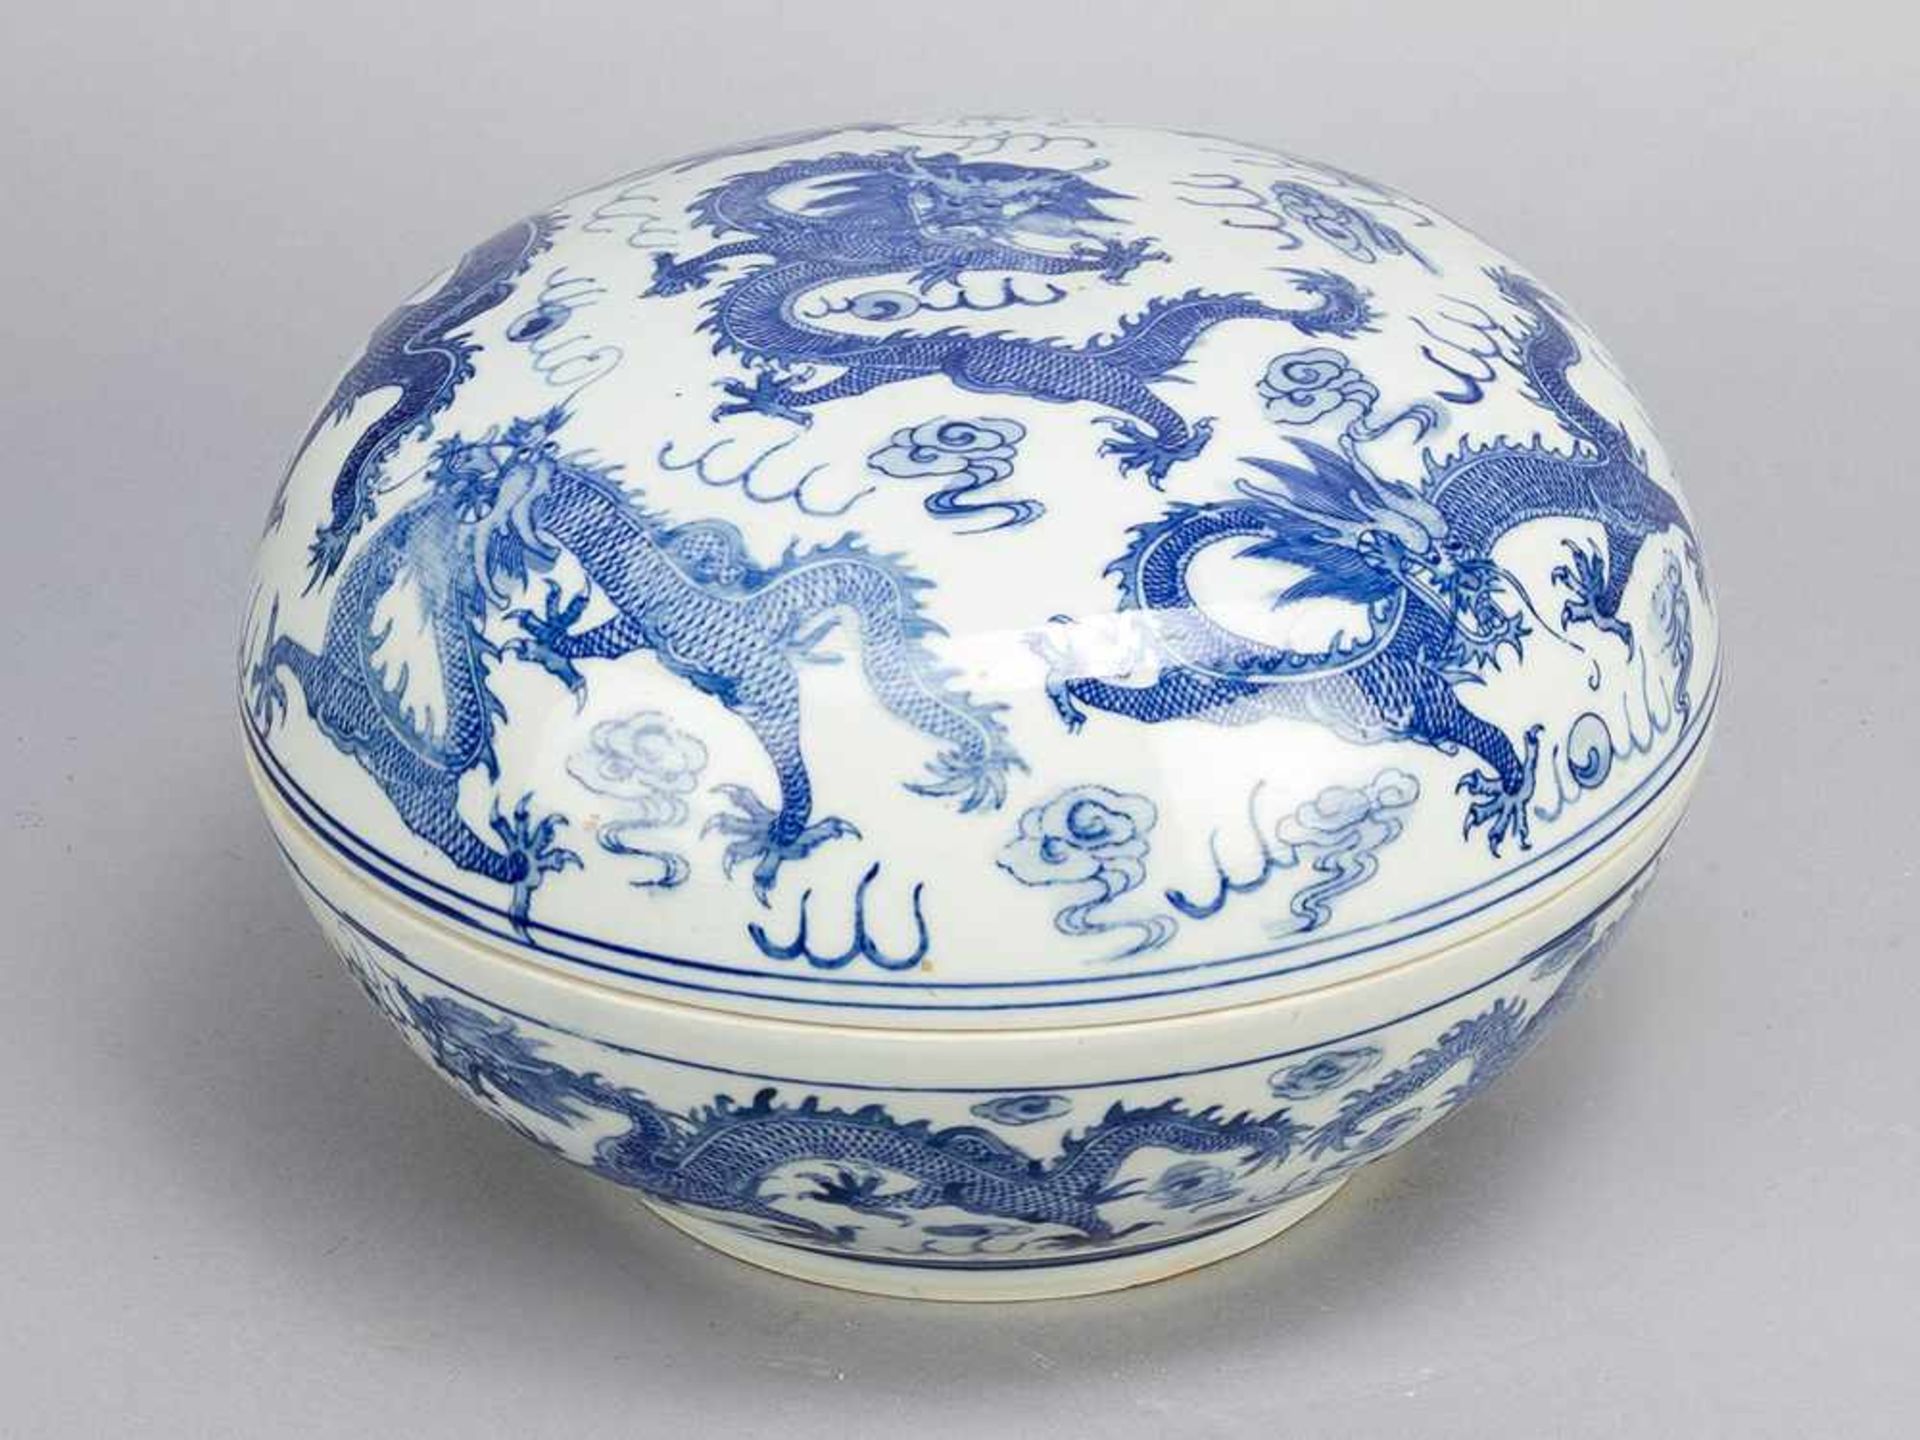 Chinese Porcelain round Box, painted, Qing Dynasty30x20cmThis is a timed auction on our German